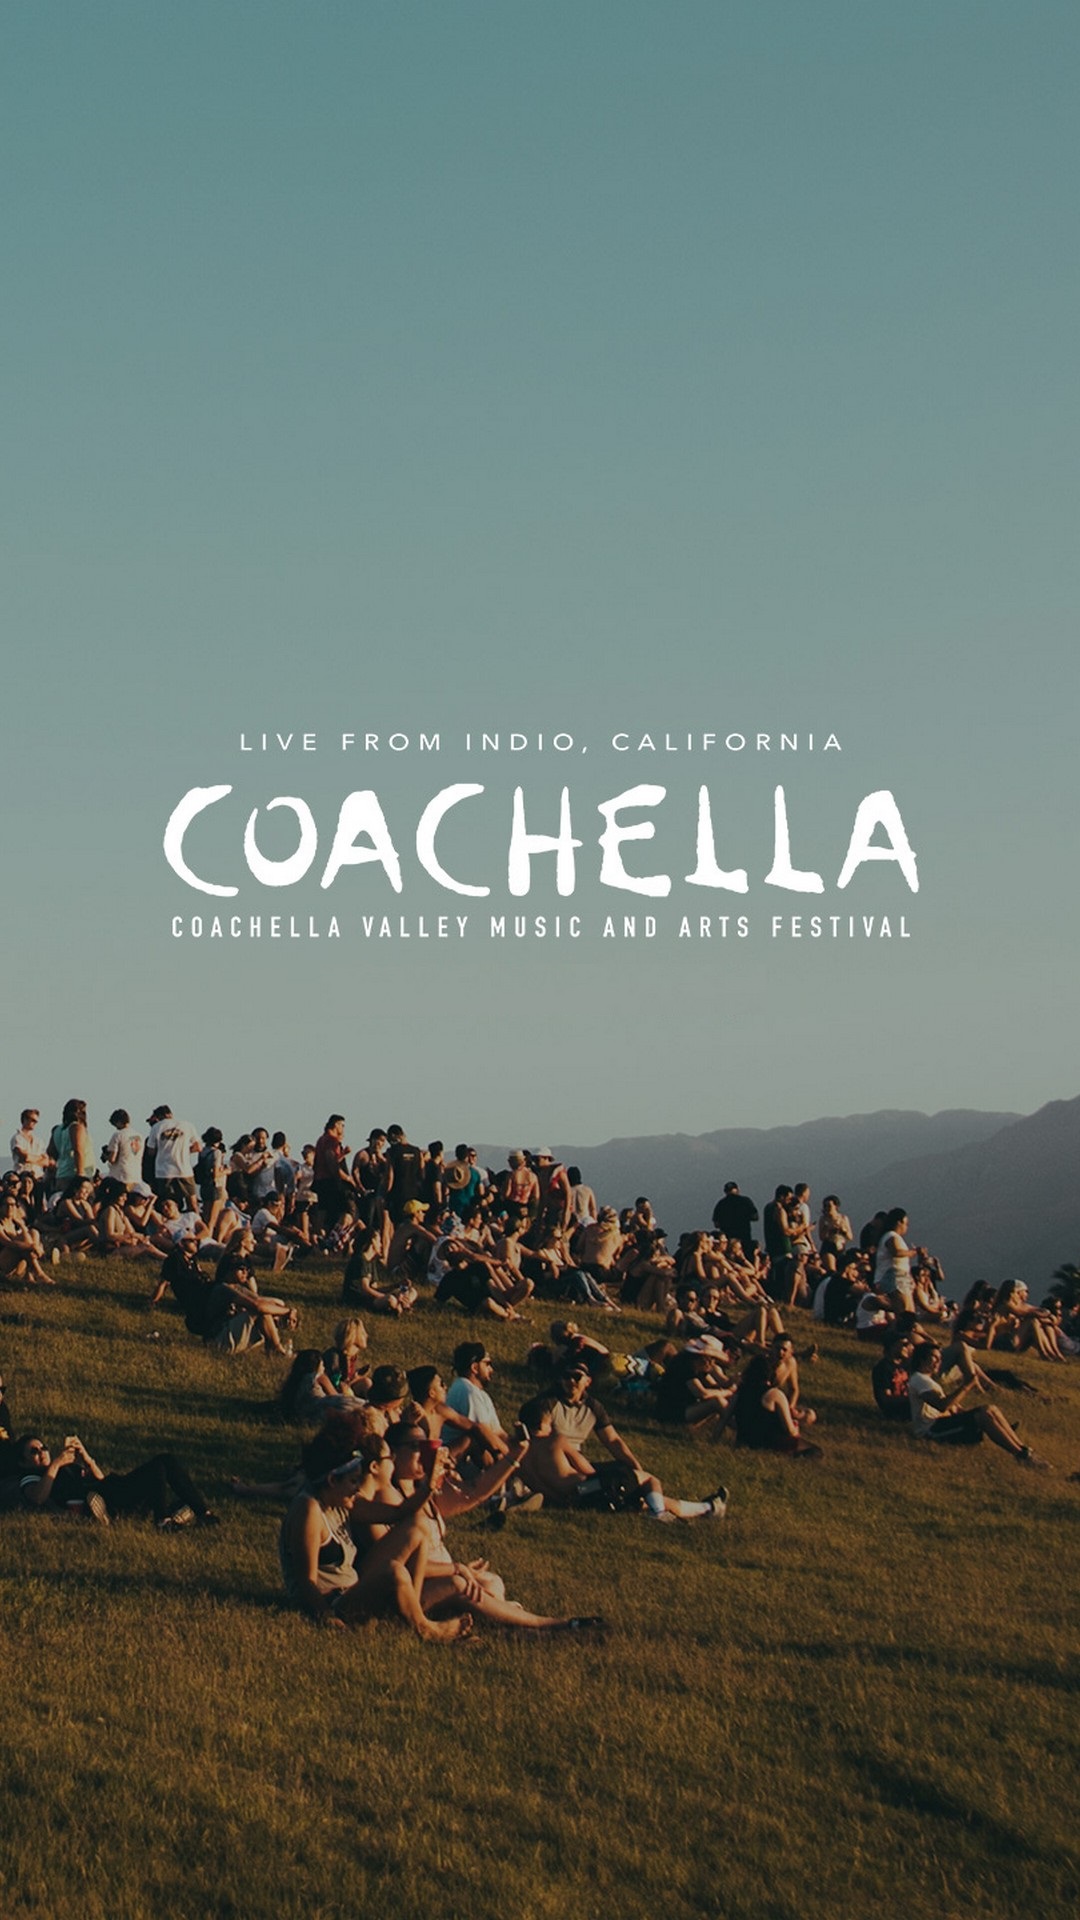 Coachella 2019 Phone Wallpaper with high-resolution 1080x1920 pixel. Download all Mobile Wallpapers and Use them as wallpapers for your iPhone, Tablet, iPad, Android and other mobile devices